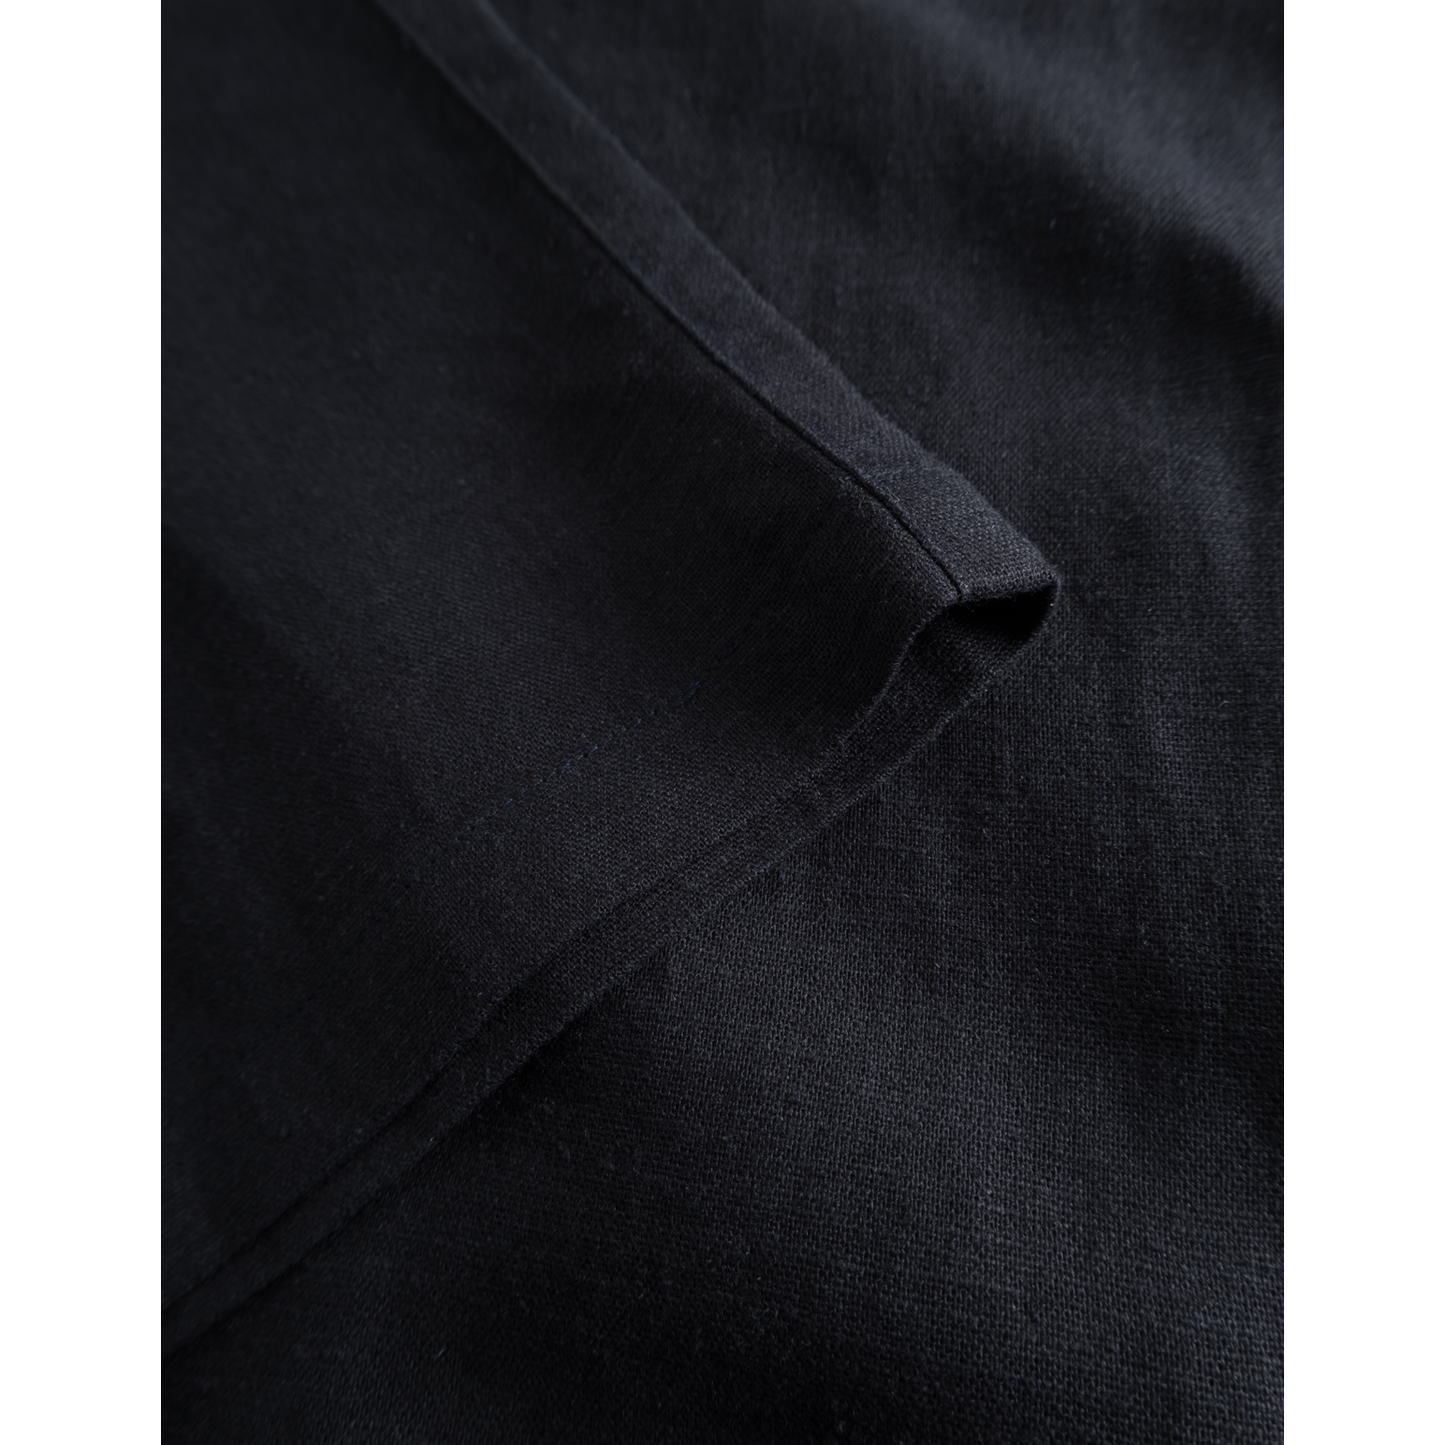 Close-up view of a Les Deux Patrick Linen Pants, Dark Navy breathable material texture showing the folds and weave detail.